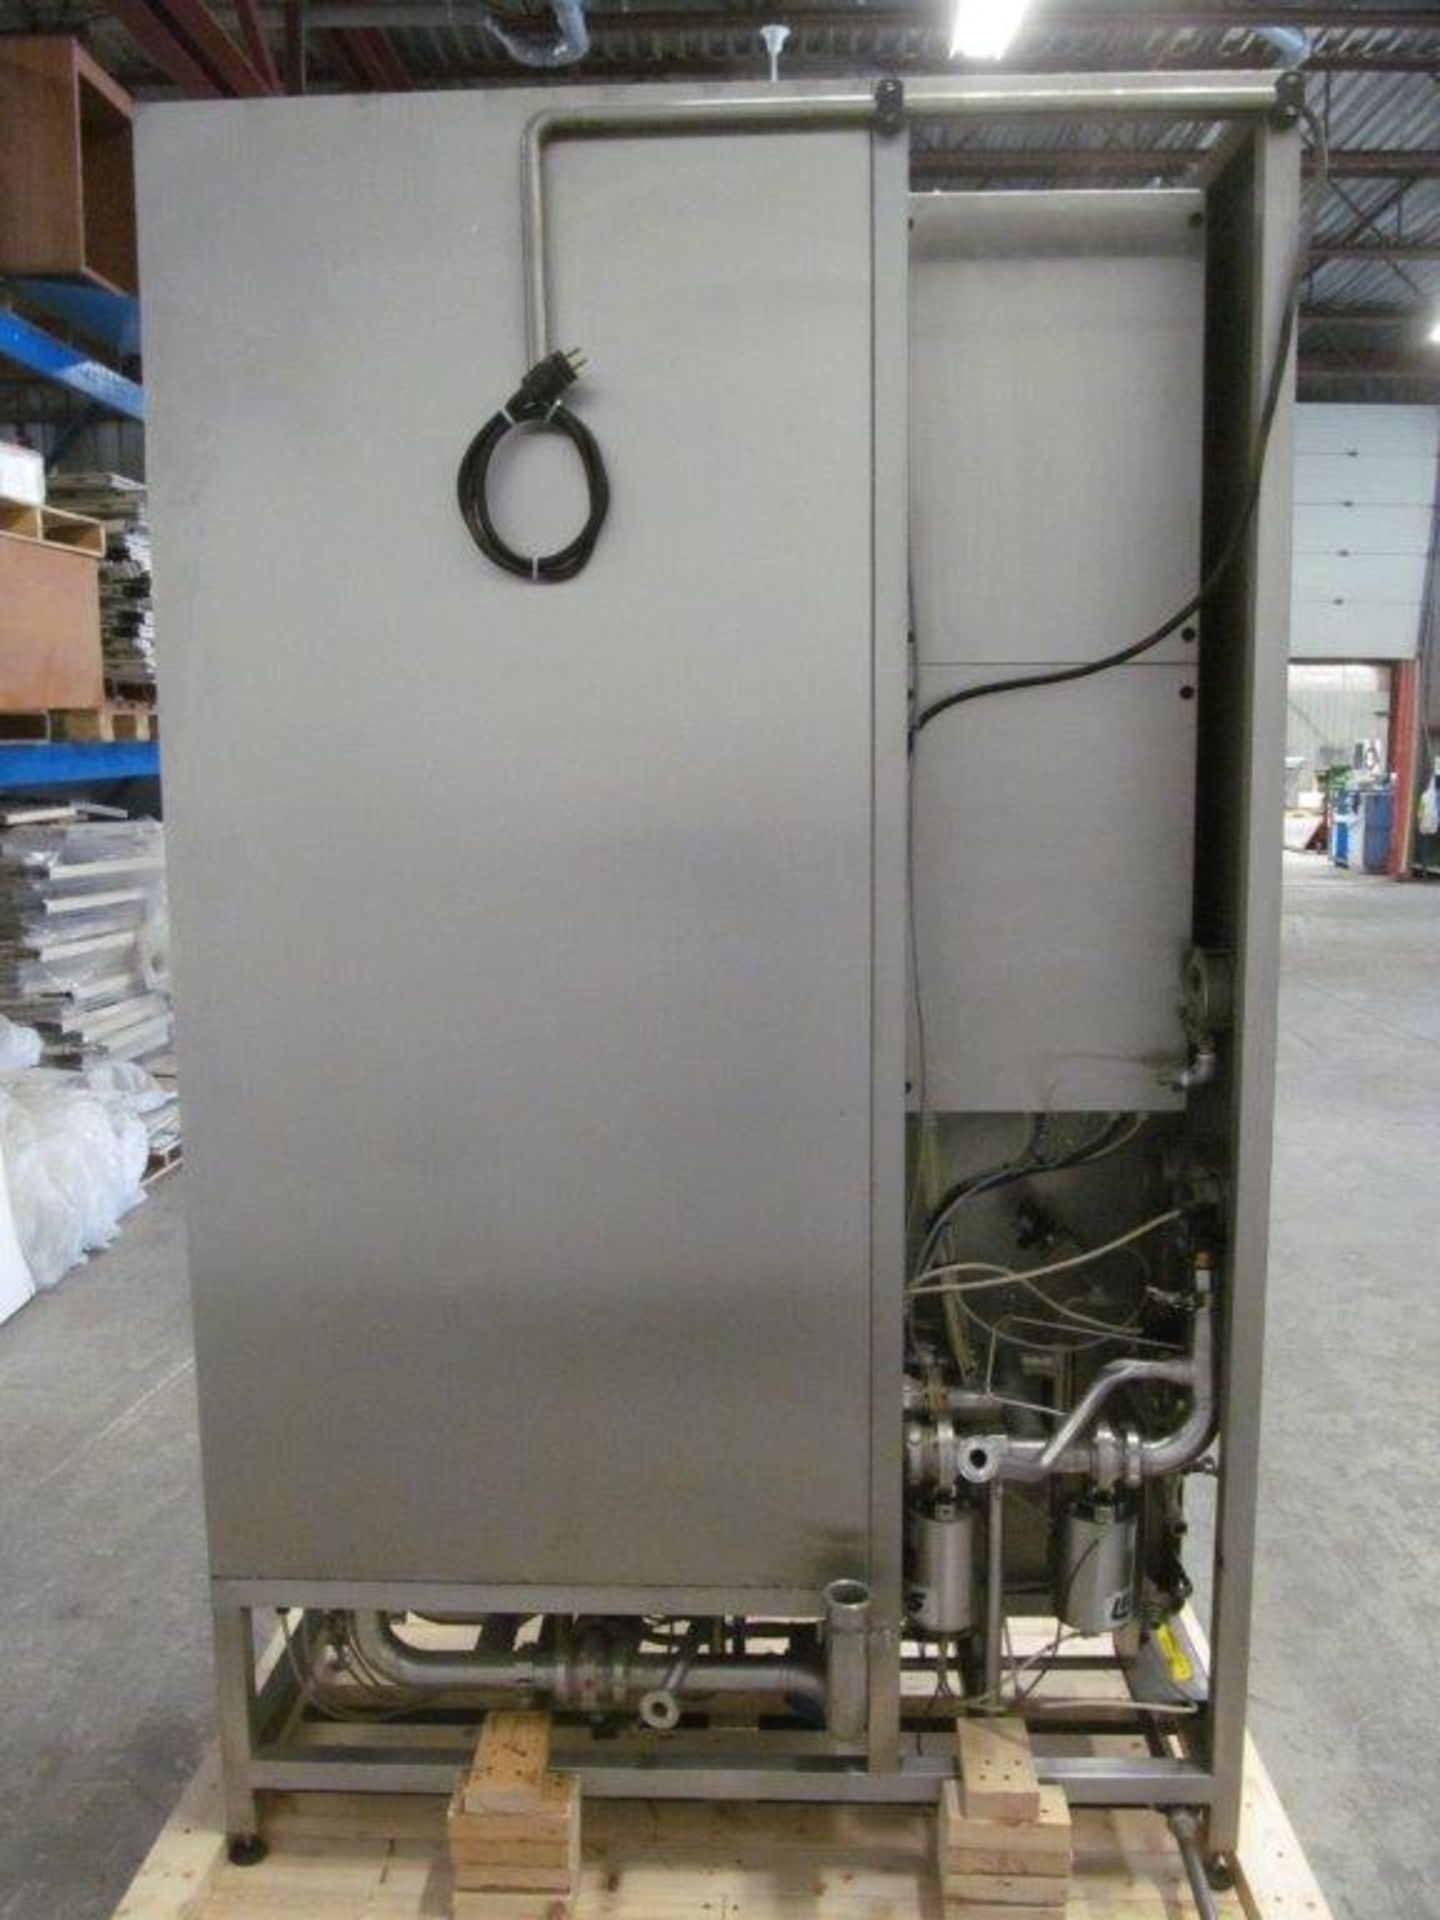 SOLERI THERMAL DESINFECTION CABINET, 200 HOURS,YEAR: 1999, 170 VOLTS, DIMENSION: 4X3X8, WEIGHT: - Image 6 of 6